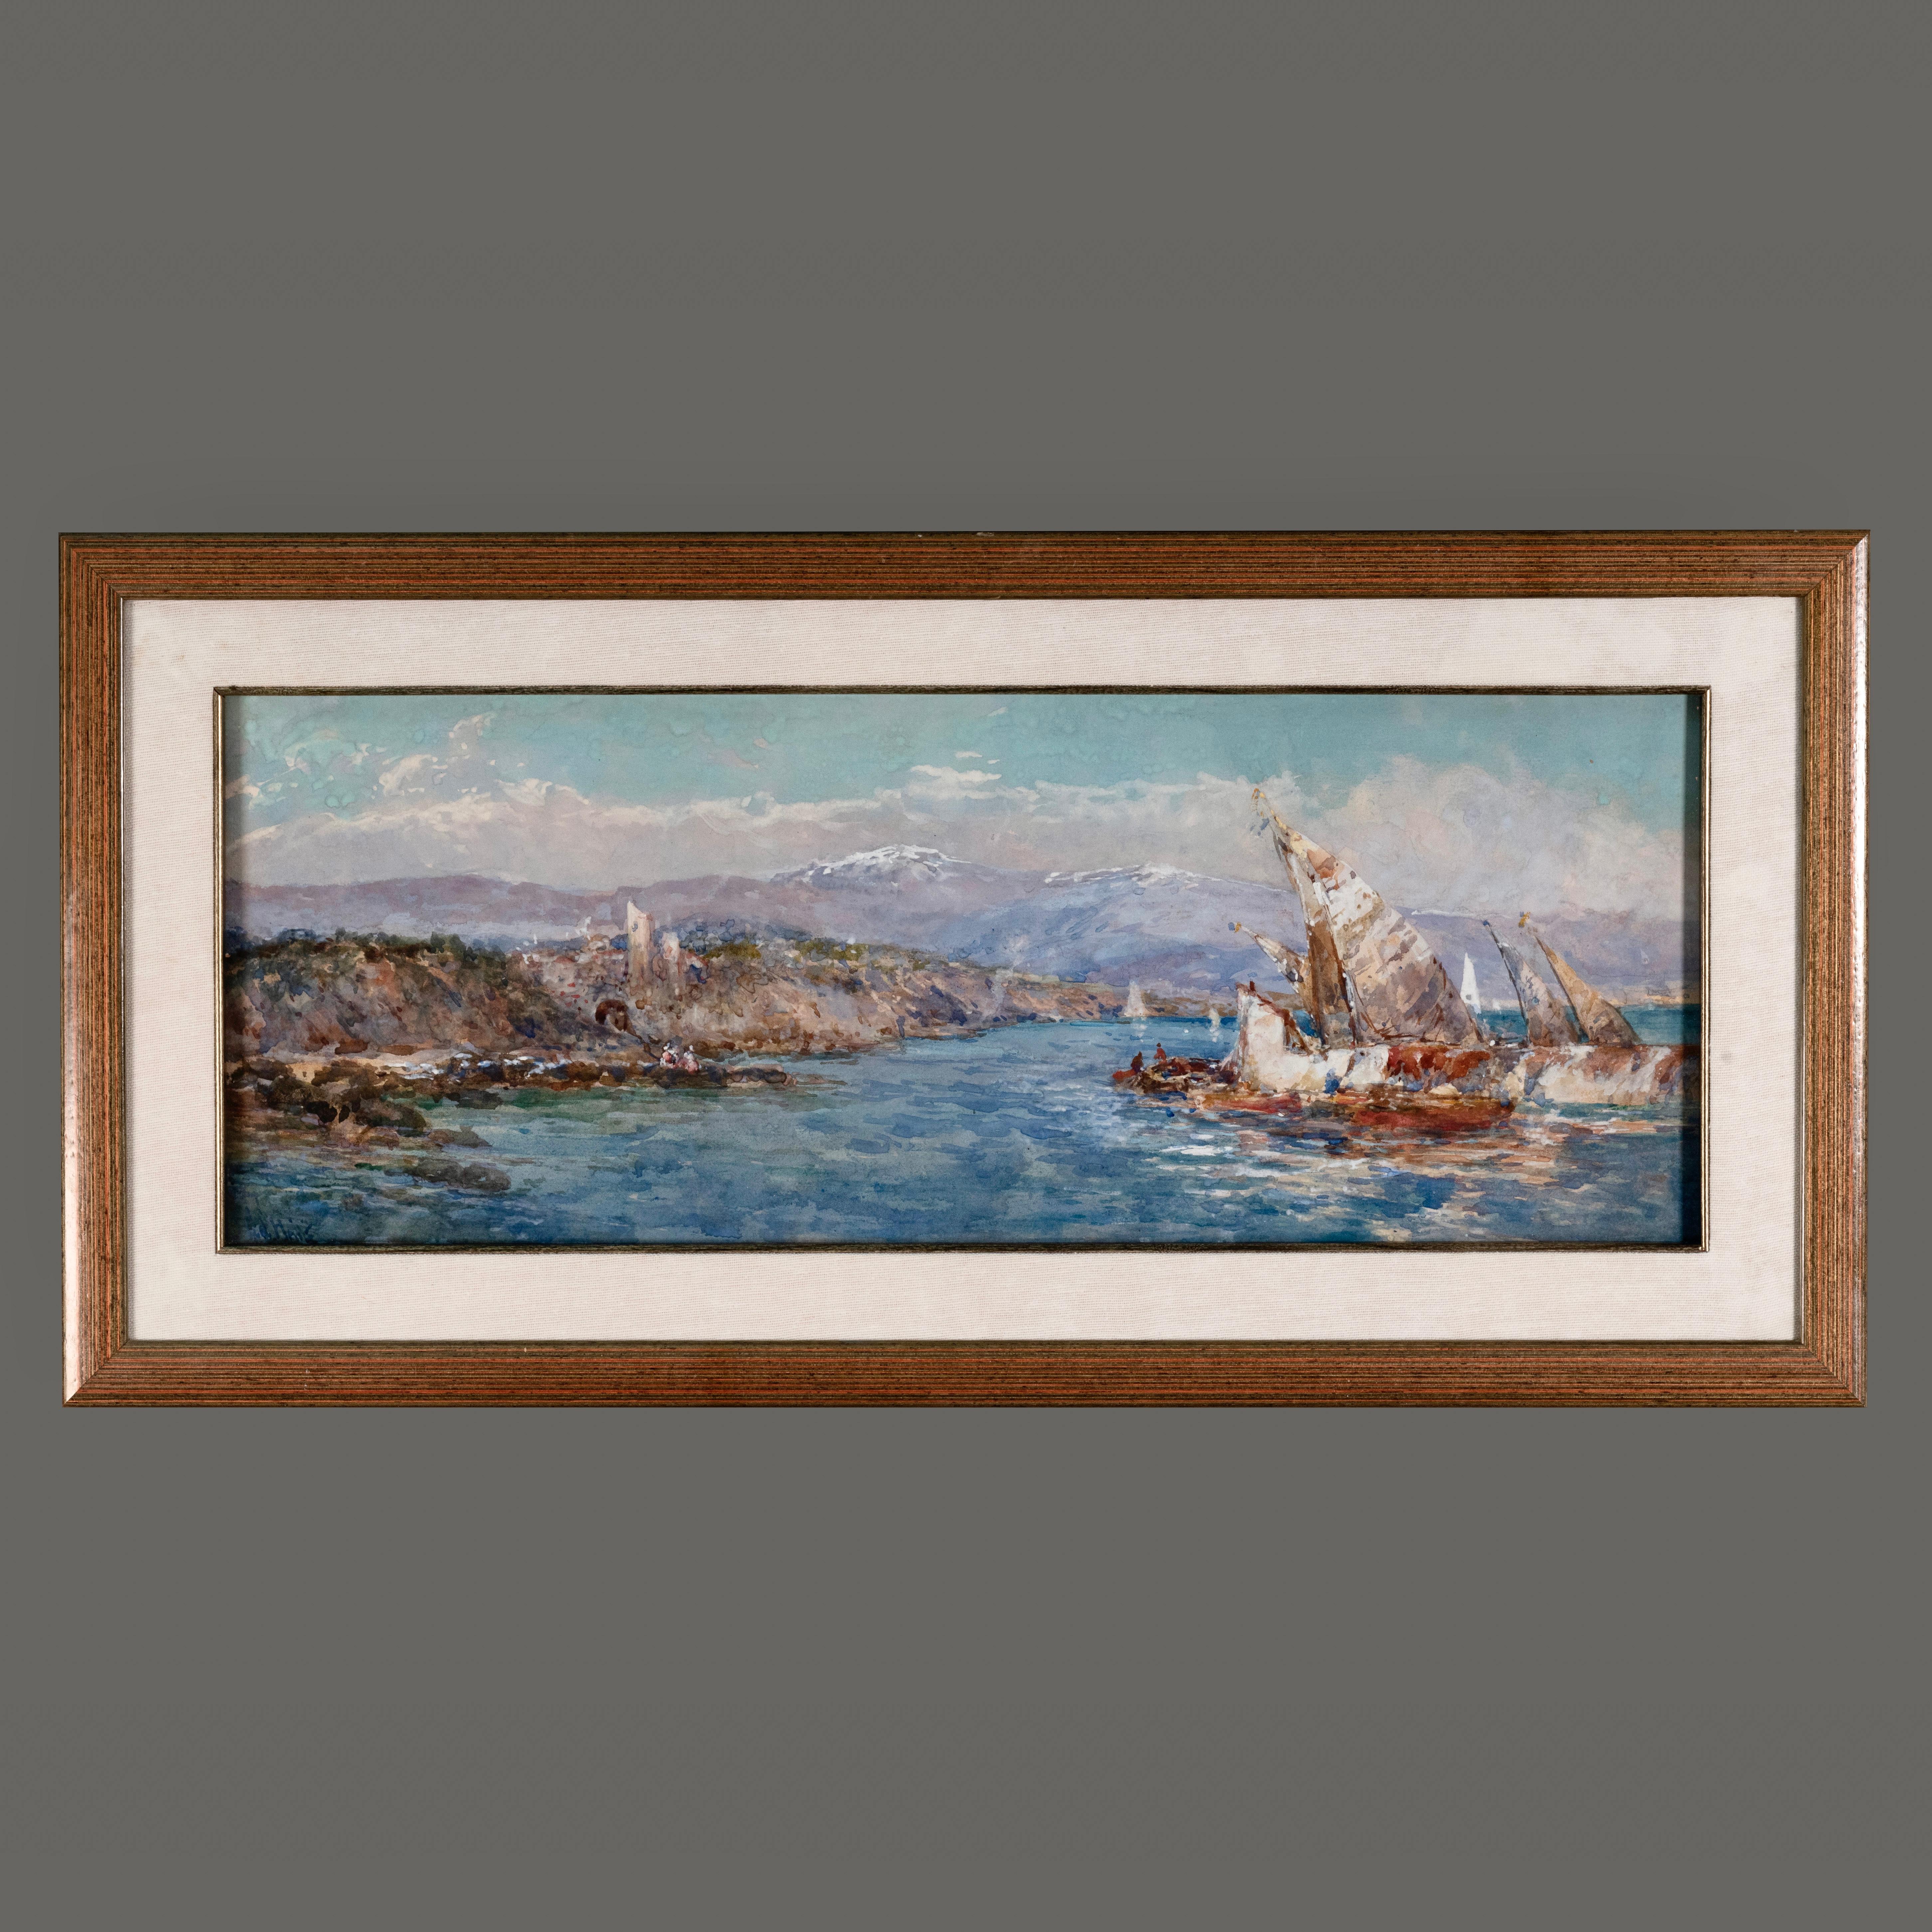 Important watercolor painting representing a beautiful landscape with sailboats in front of a rocky coastline 

Dimensions without frame 
cm 58 x 21.5
George Charles Haité (8 June 1855 – 31 March 1924) was an English designer, painter, illustrator